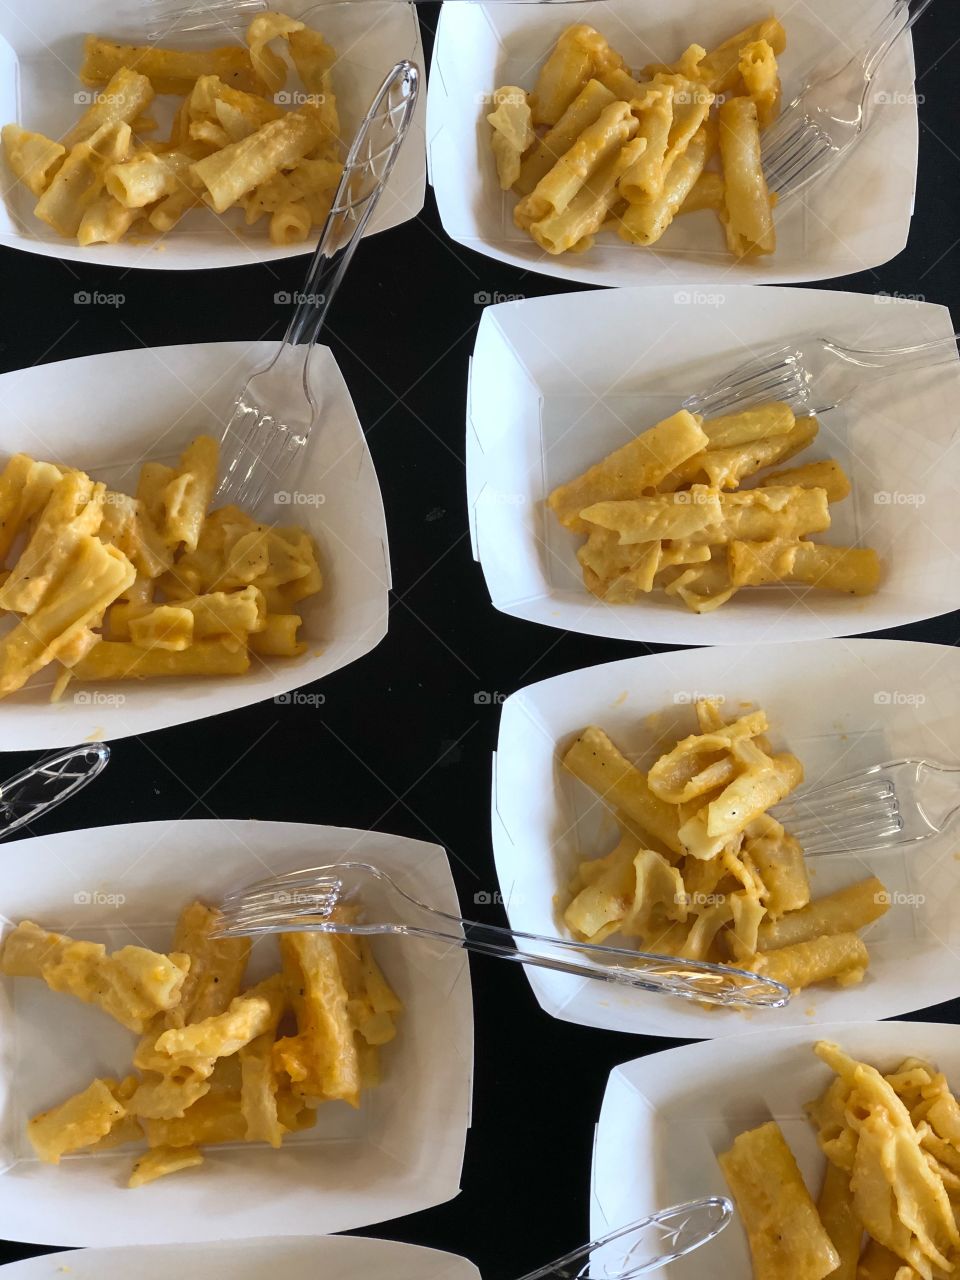 Close up shots of ready-to-eat rich, creamy yellow macaroni and cheese.